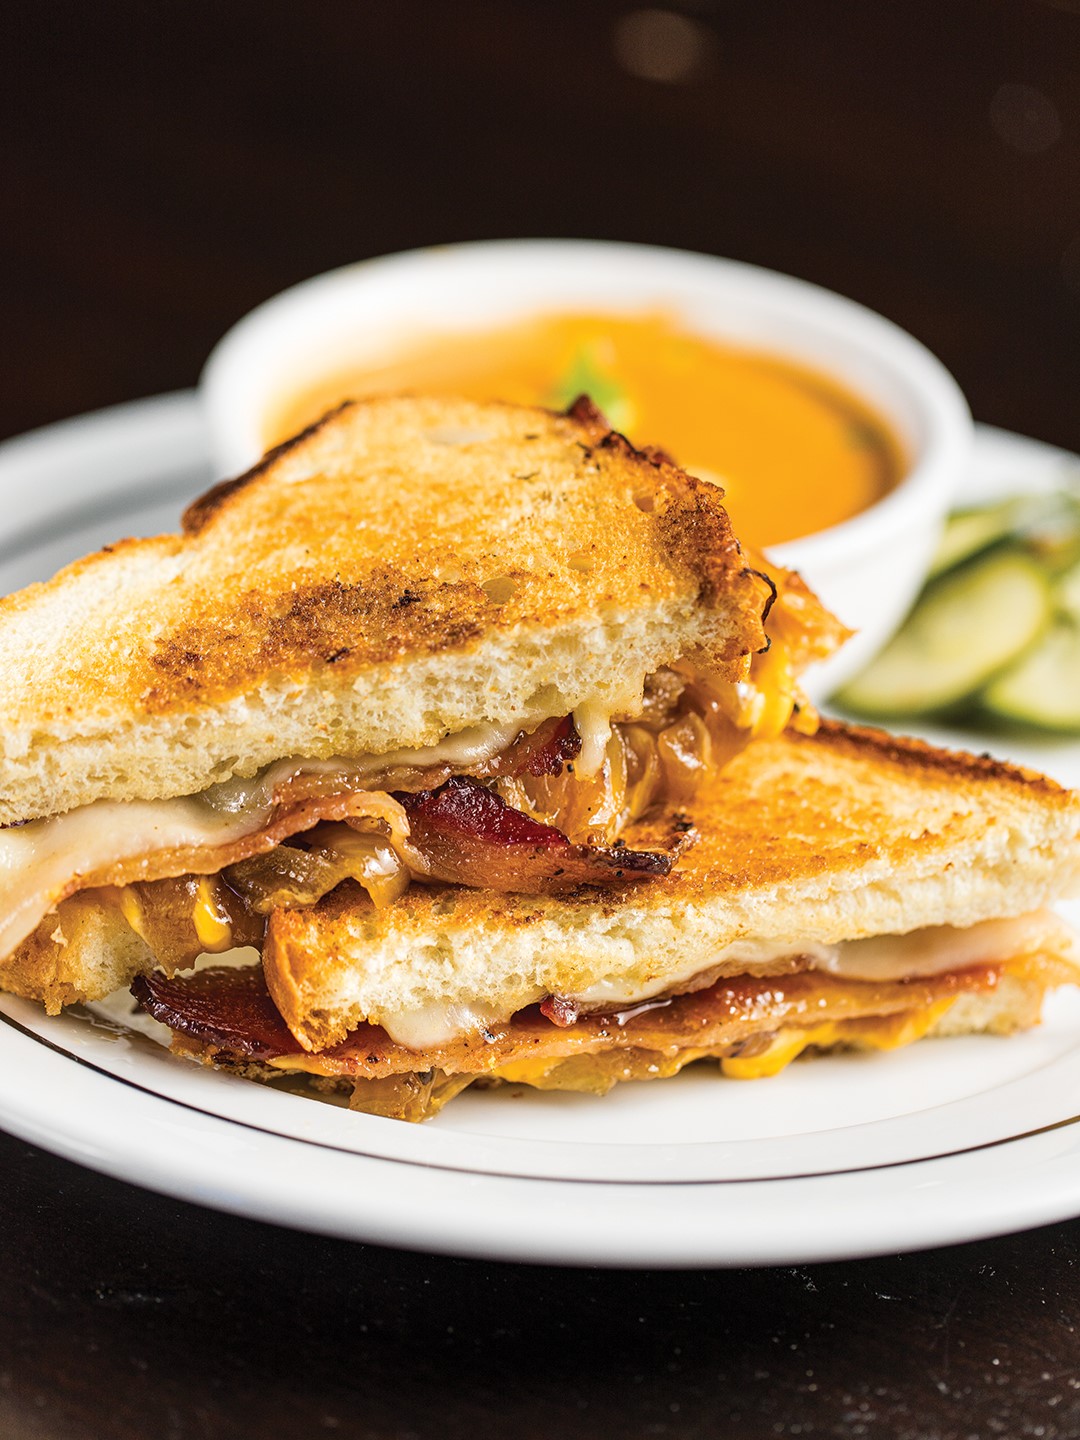 Delight in the Grilled Cheese with Lobster Bisque from Gold Nugget Tavern & Grille.